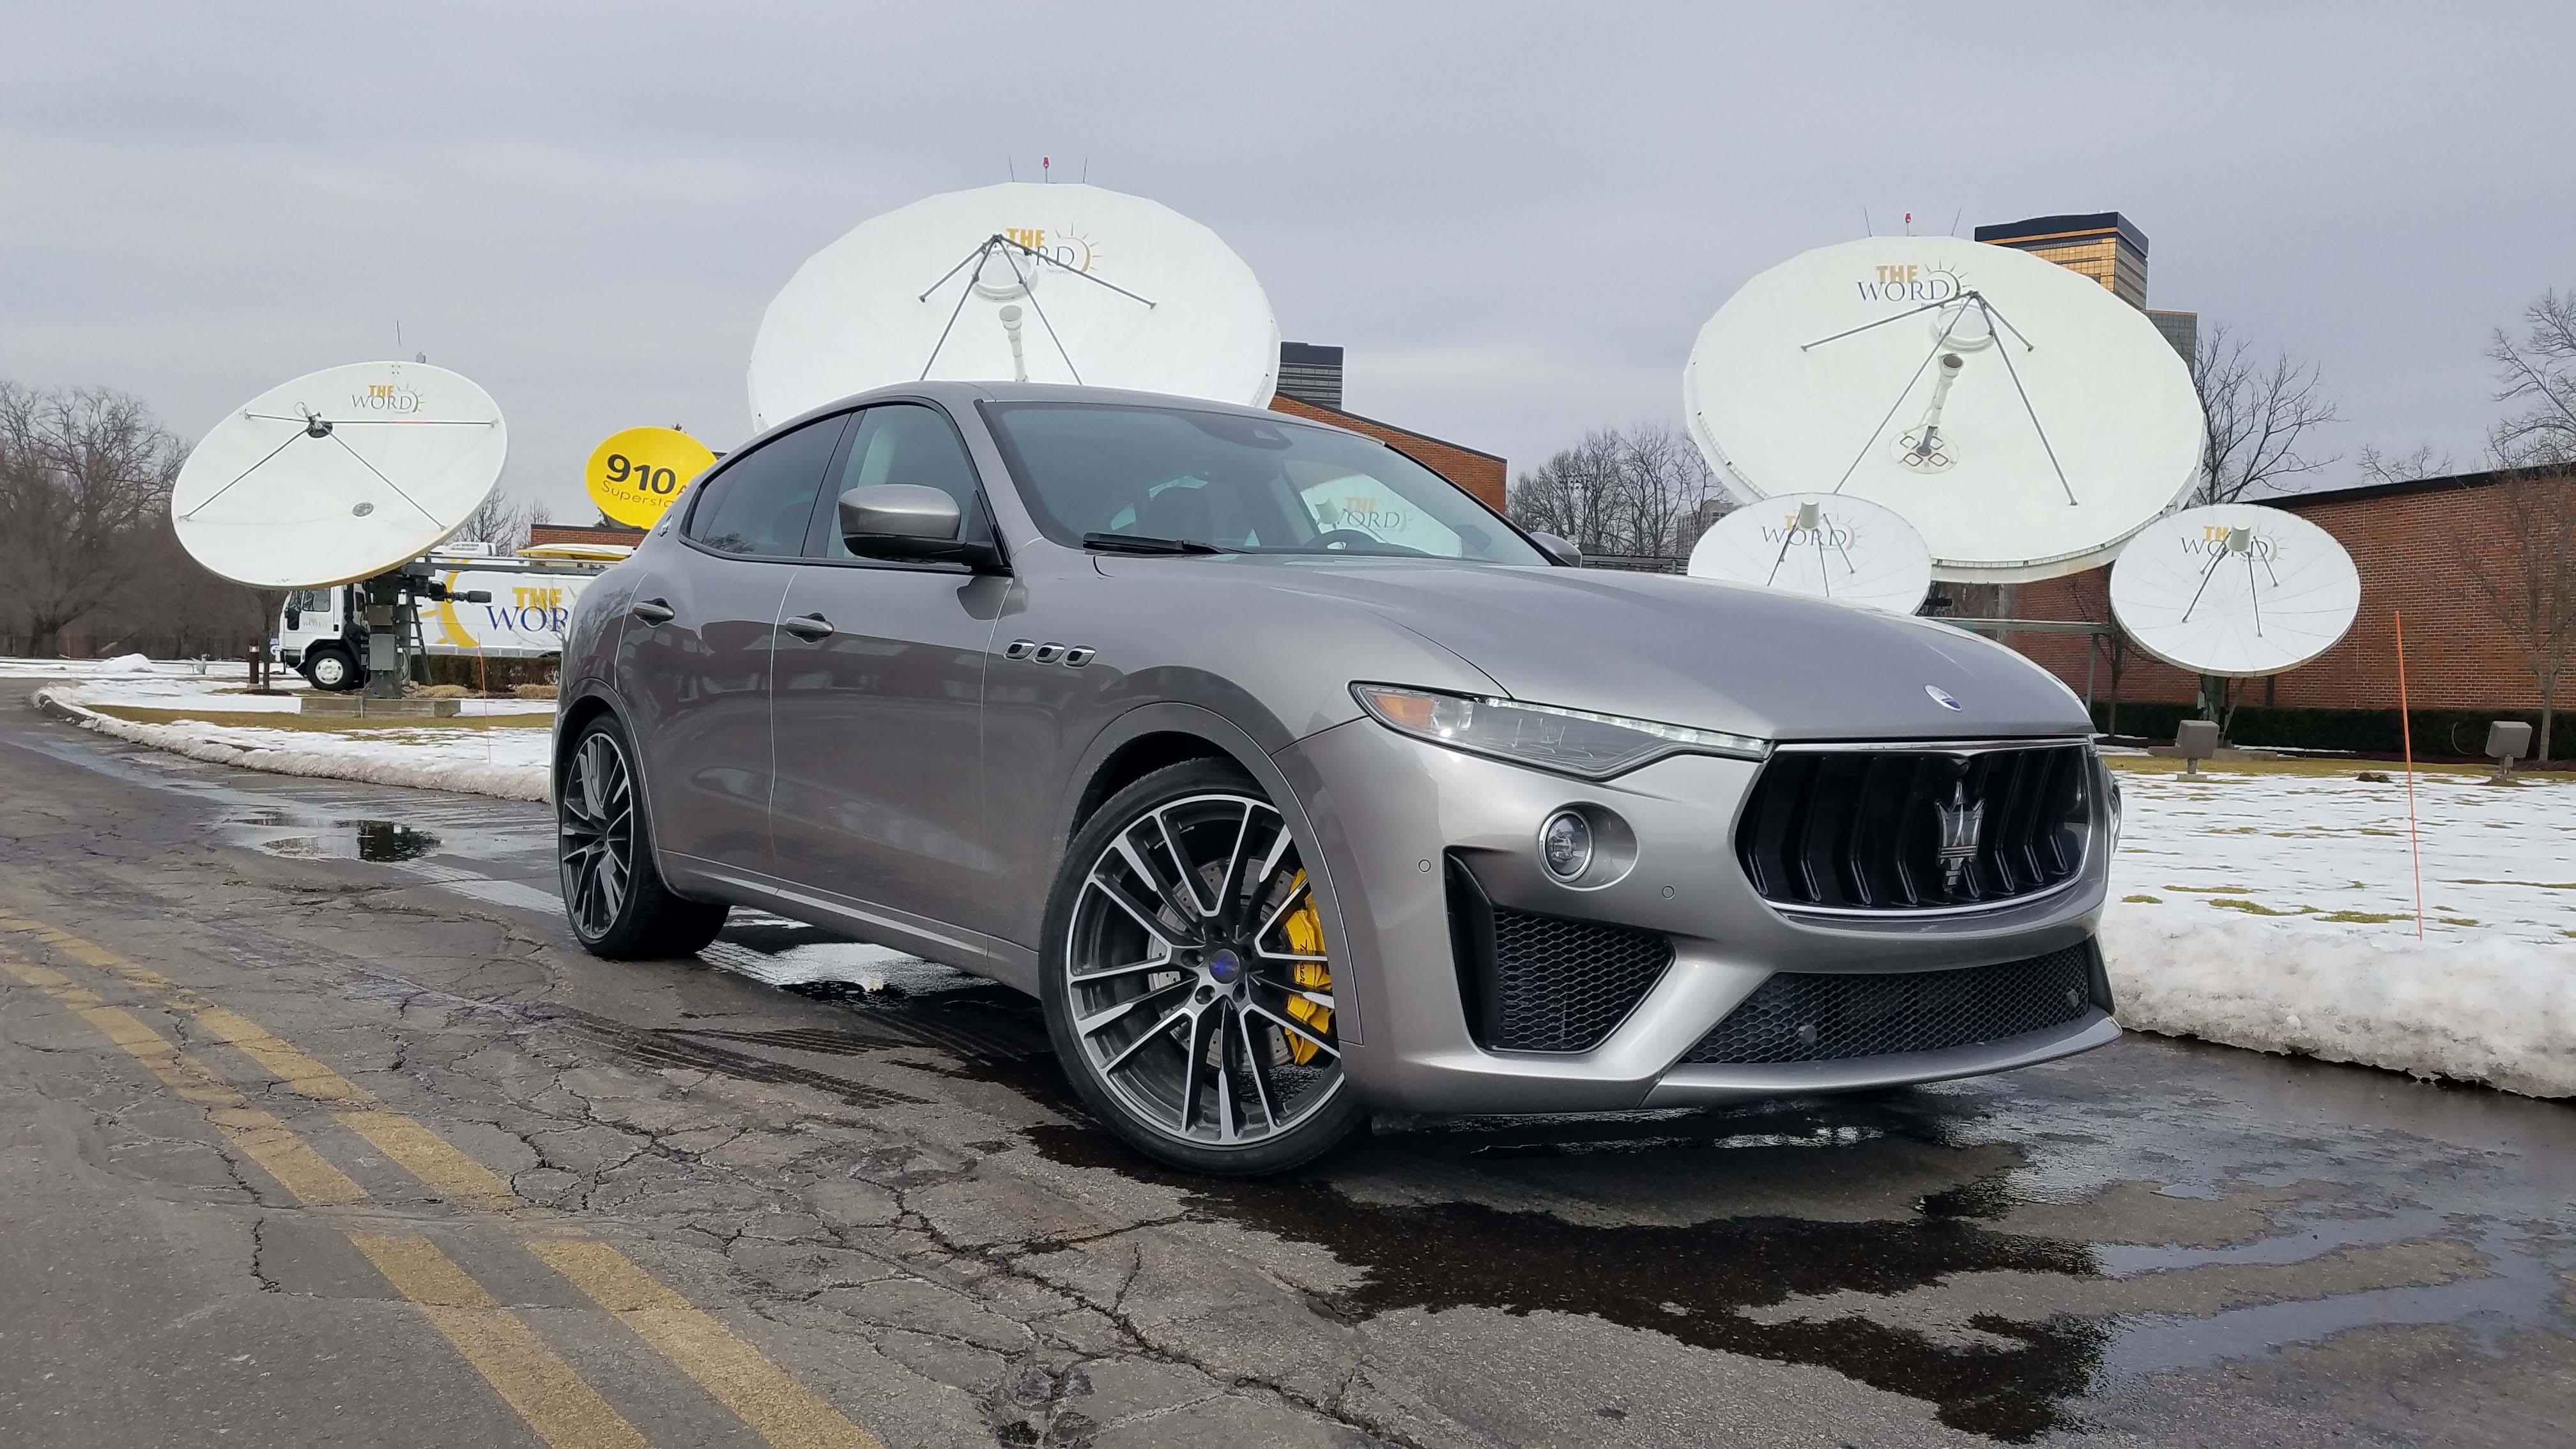 Once planned on a Jeep chassis, the Maserati Levante GTS is based on the same large sedan, rear-drive platform as the Maserati Ghibli. But it's the twin-turbo under the hood that makes this thing sing.